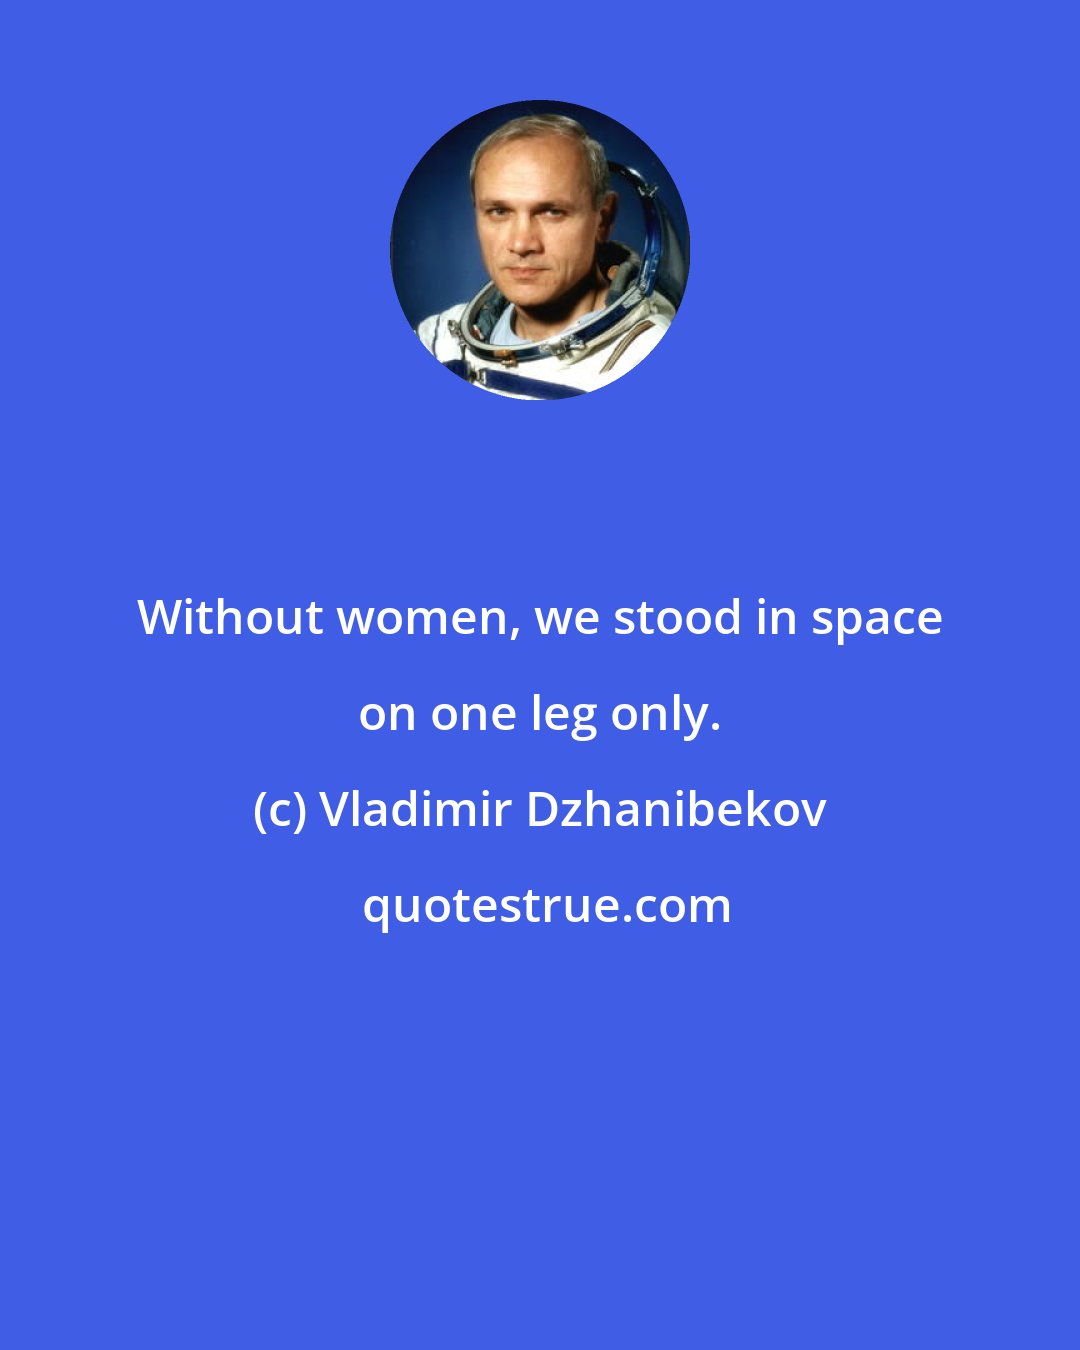 Vladimir Dzhanibekov: Without women, we stood in space on one leg only.